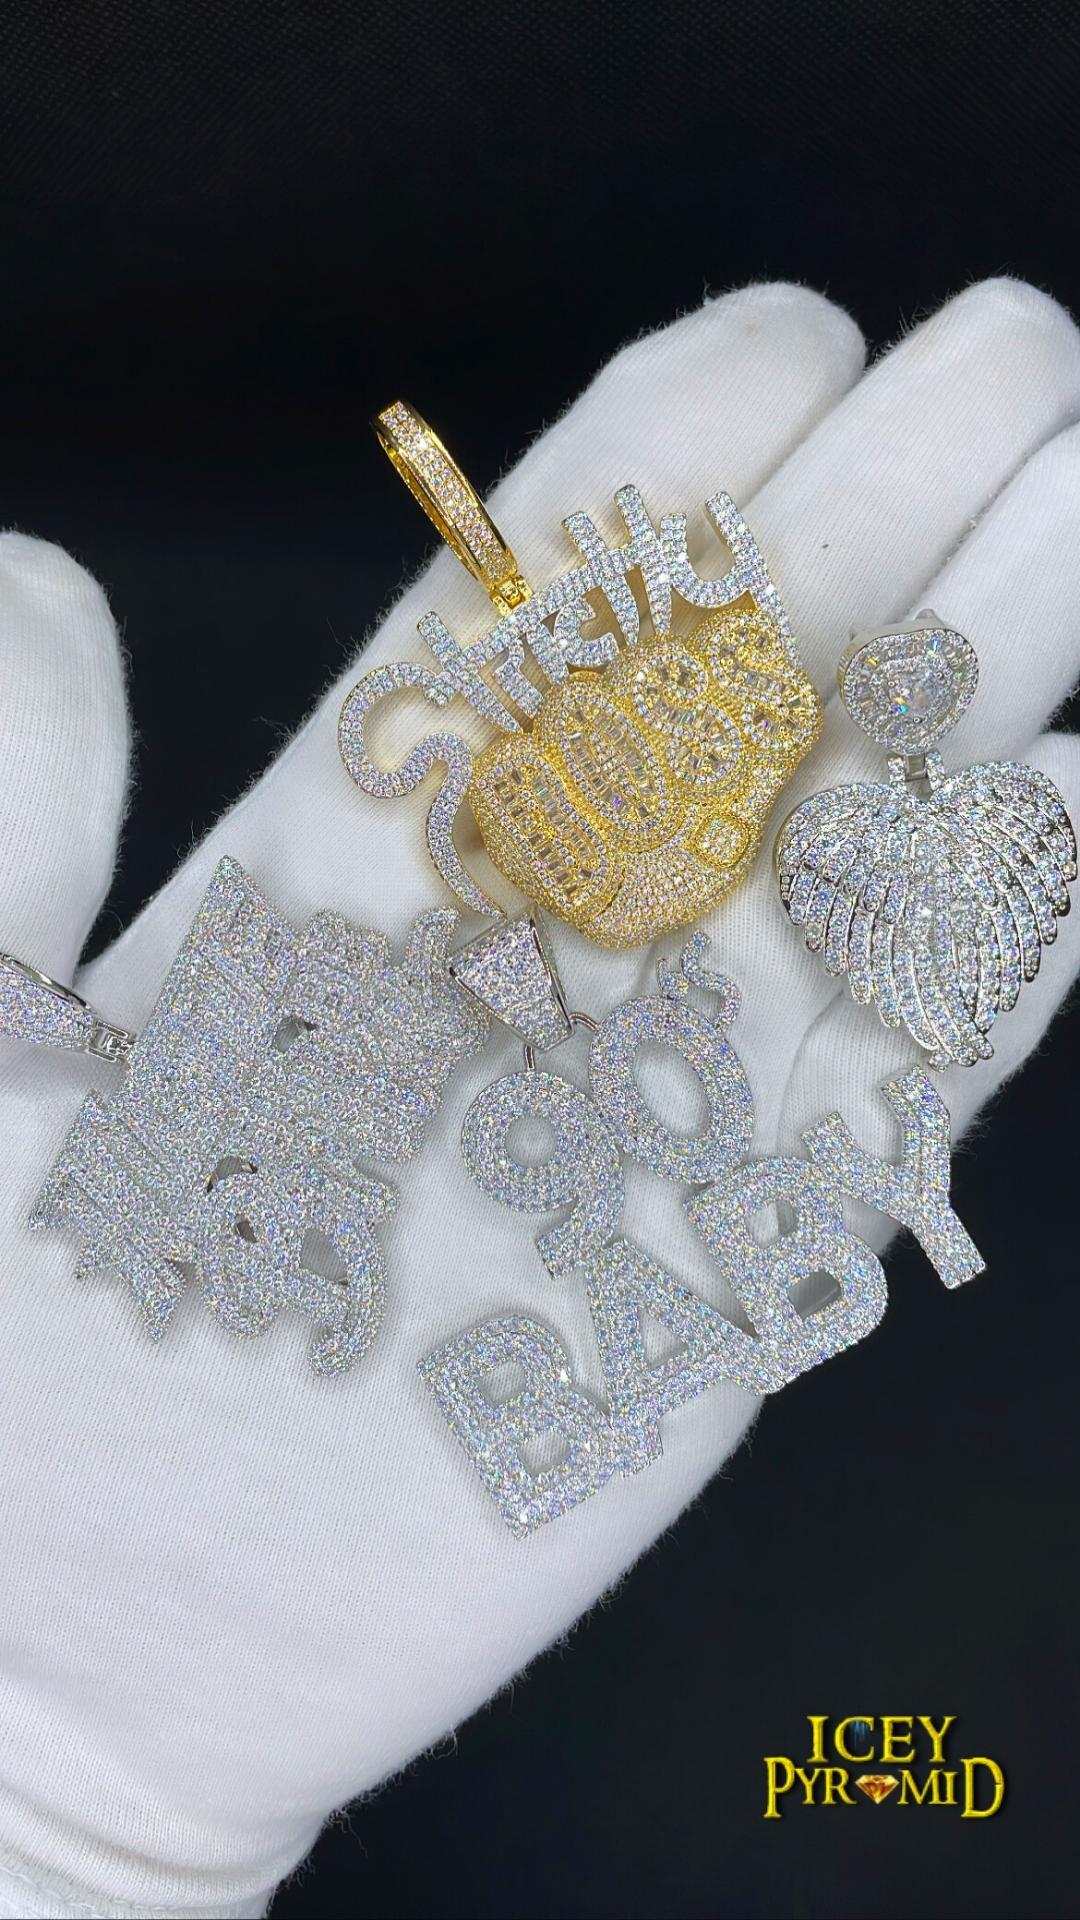 90's Baby Iced Out Letter Diamond Pendant